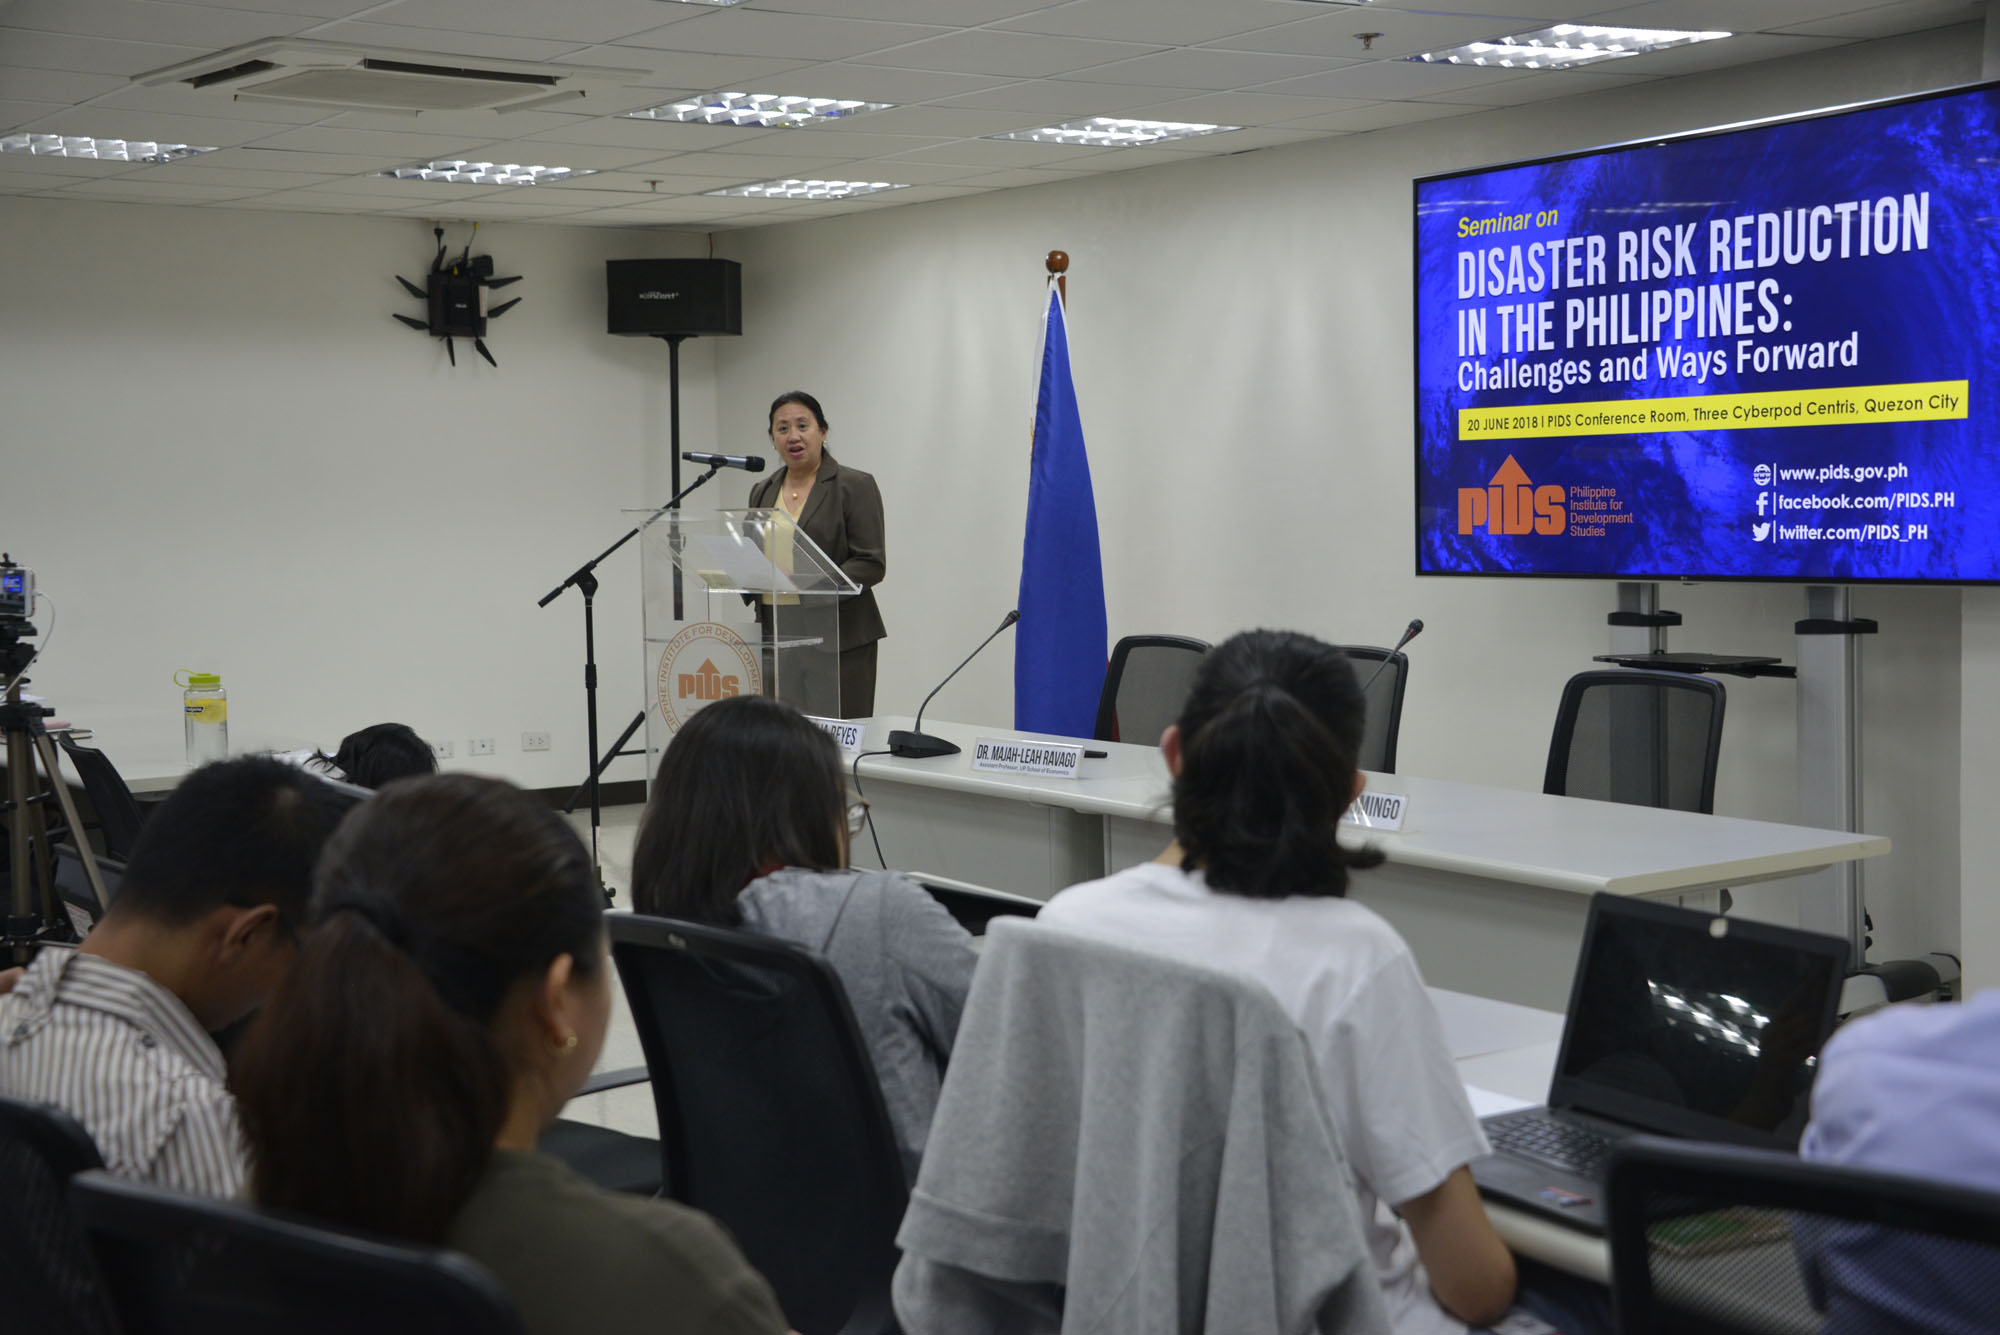 Disaster Risk Reduction in the Philippines: Challenges and Ways Forward-drrm-seminar-1-20180620.jpg